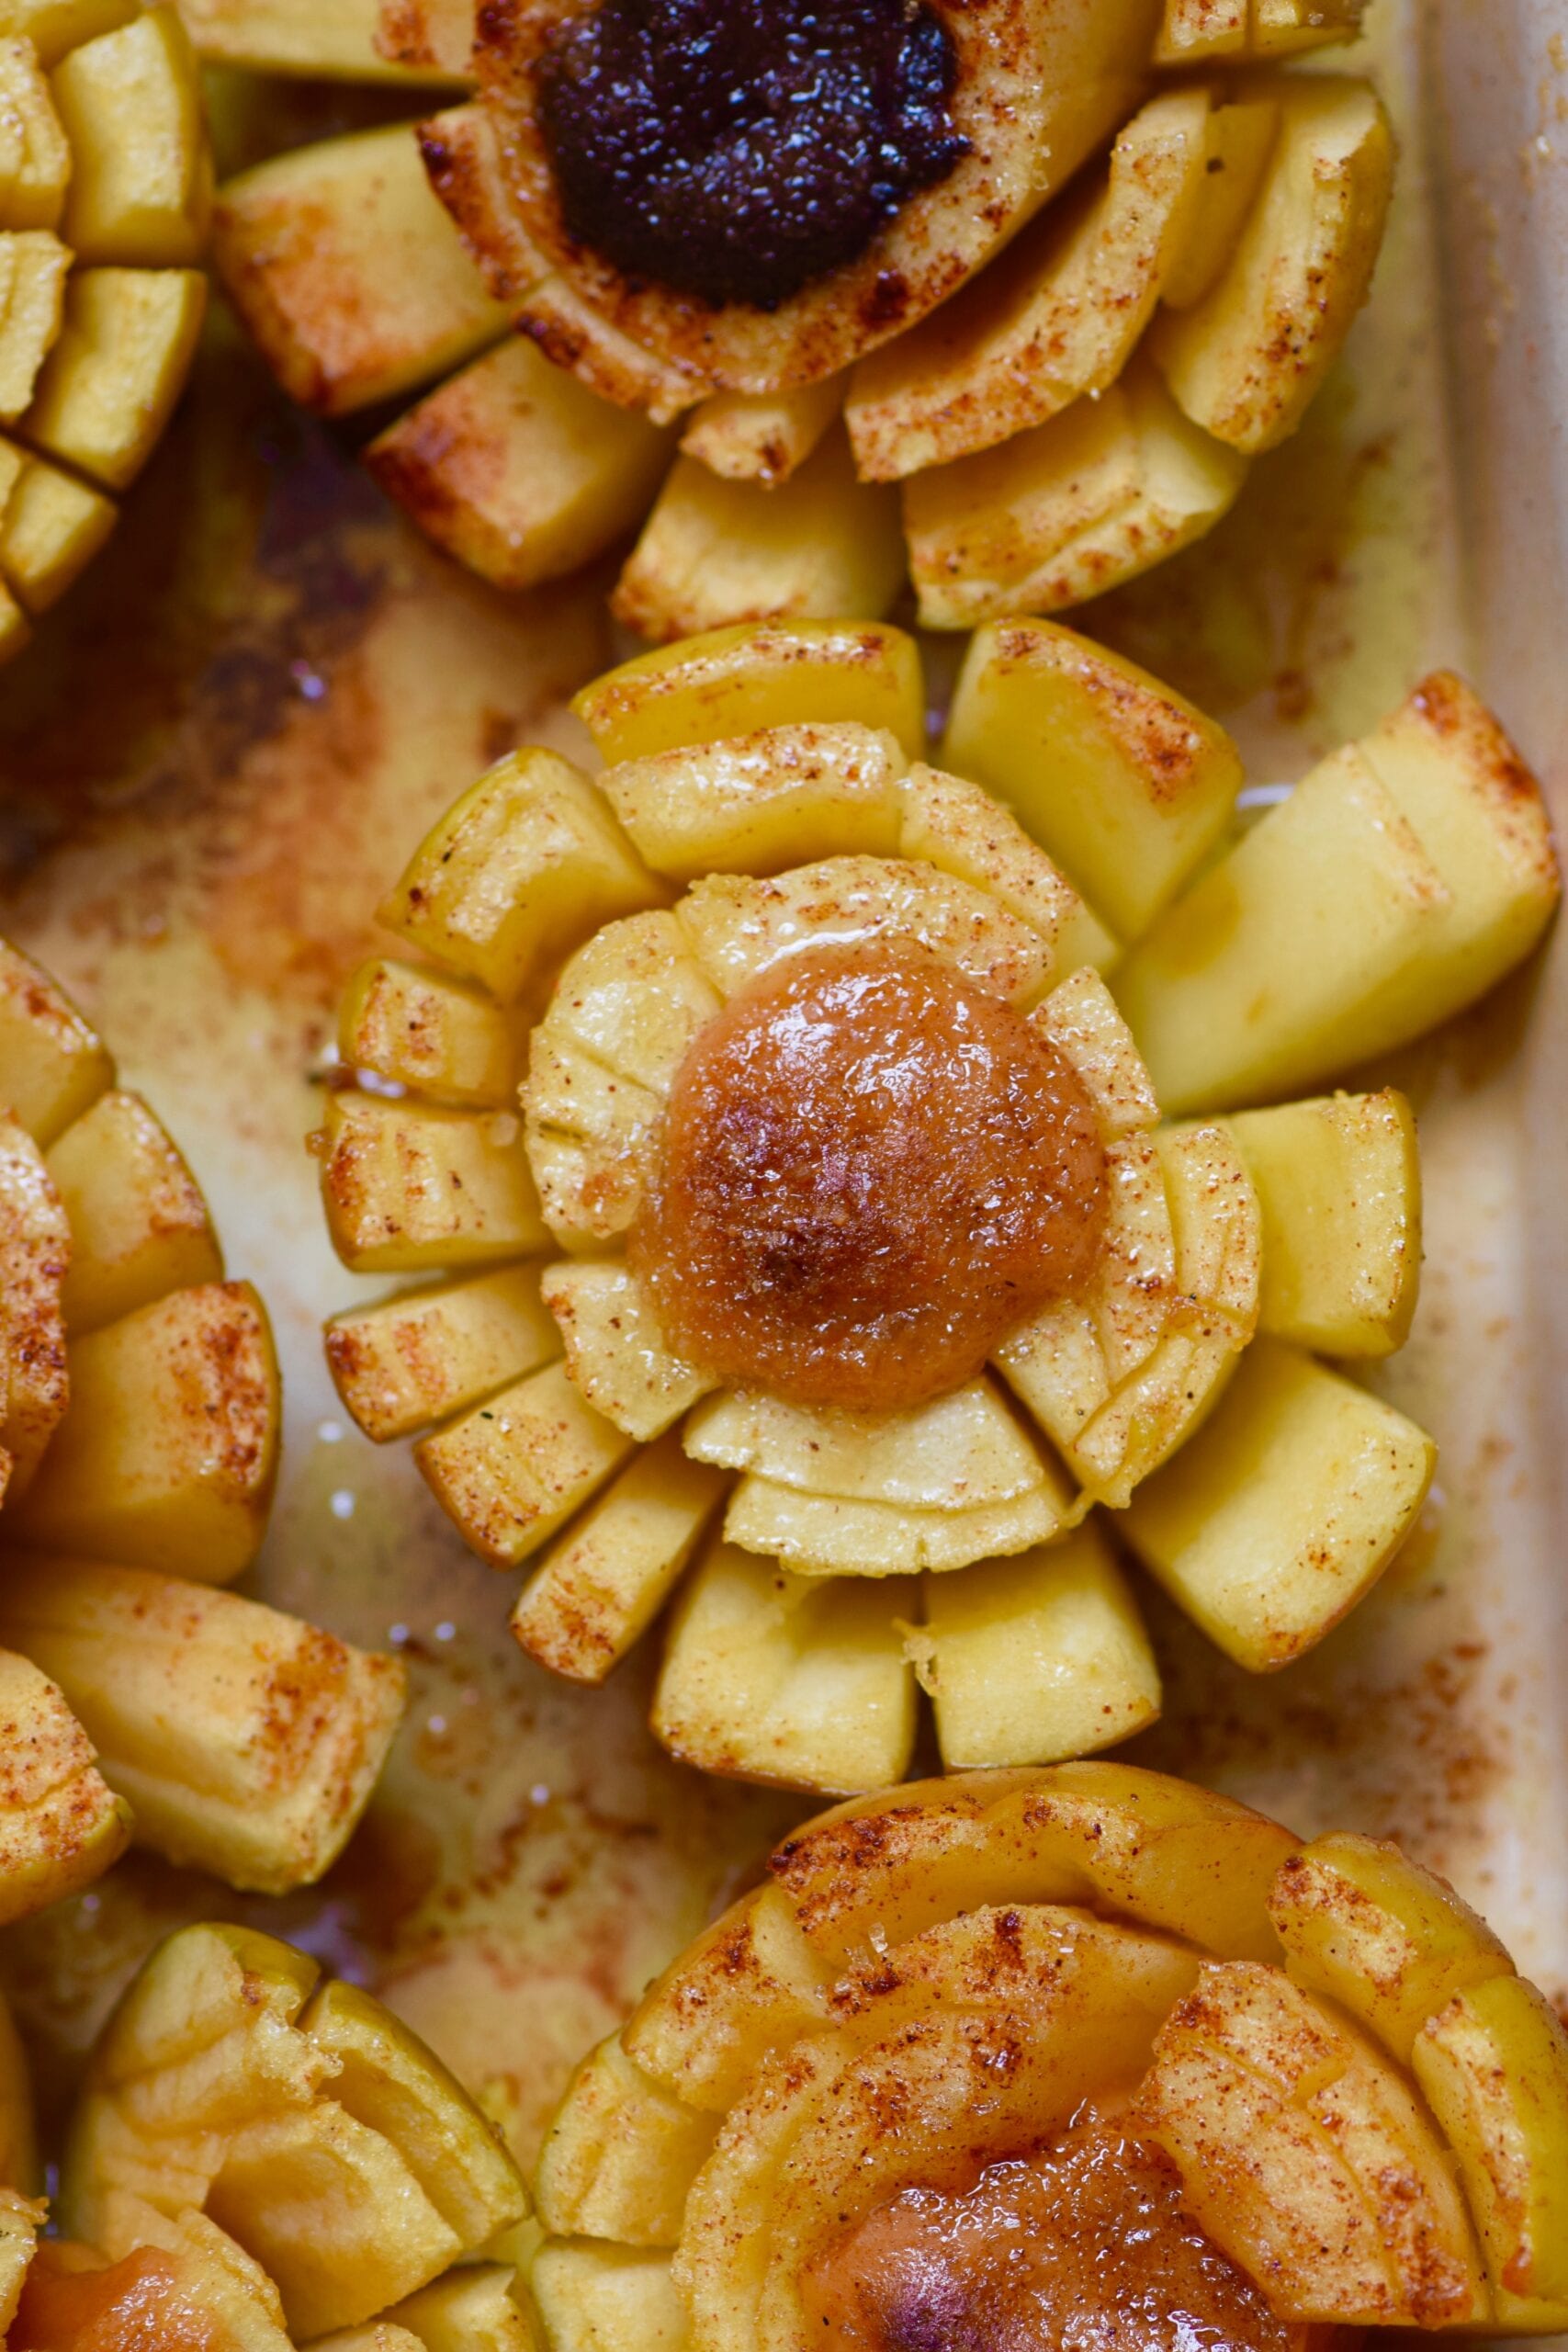 Blooming baked apple stuffed with caramel sauce